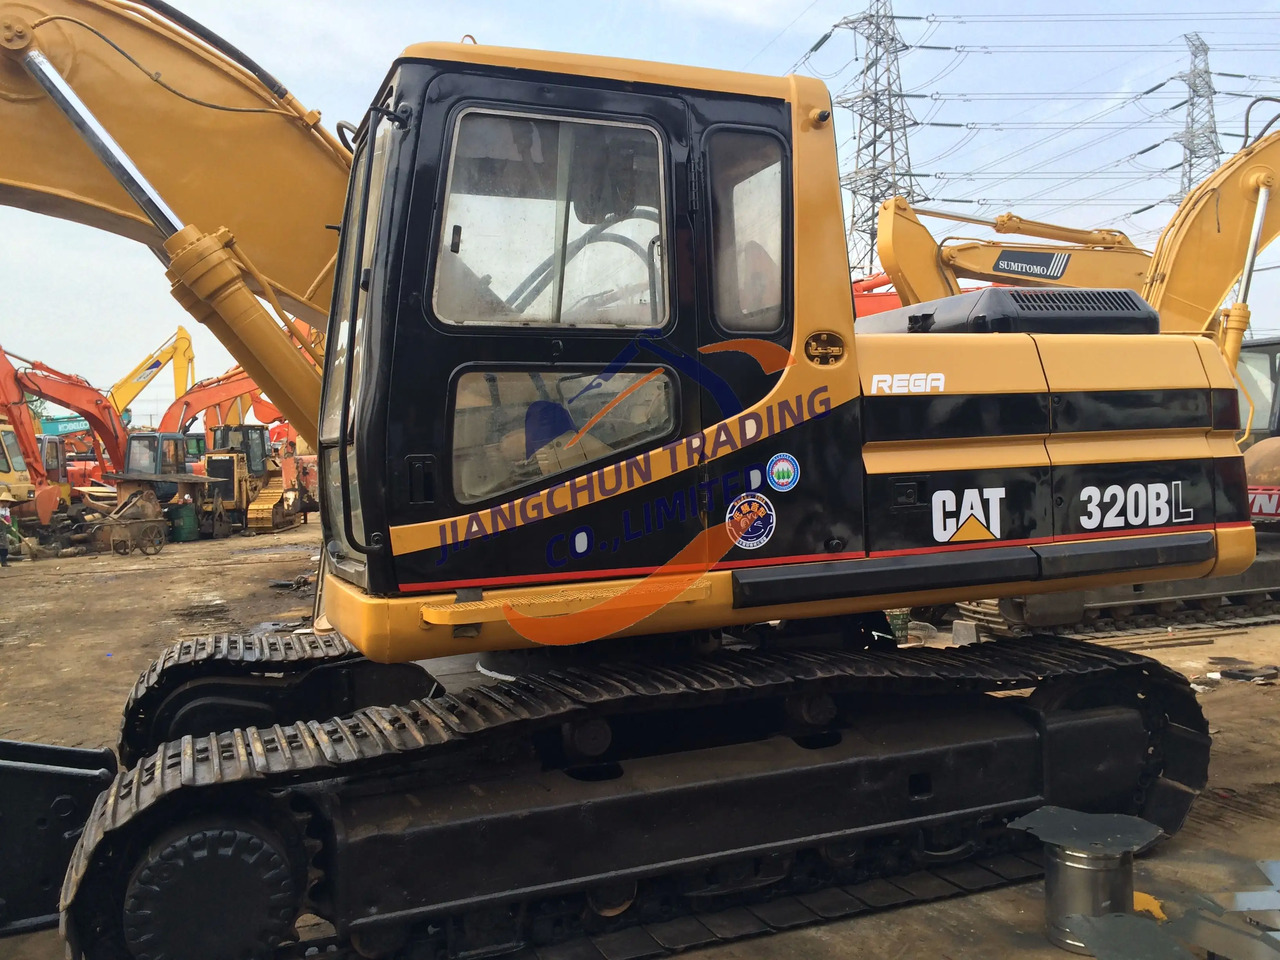 Crawler excavator perfect performance for Used 320BL Hydraulic Crawler Excavator in good condition Suitable For Construction/ Agriculture Digging: picture 6